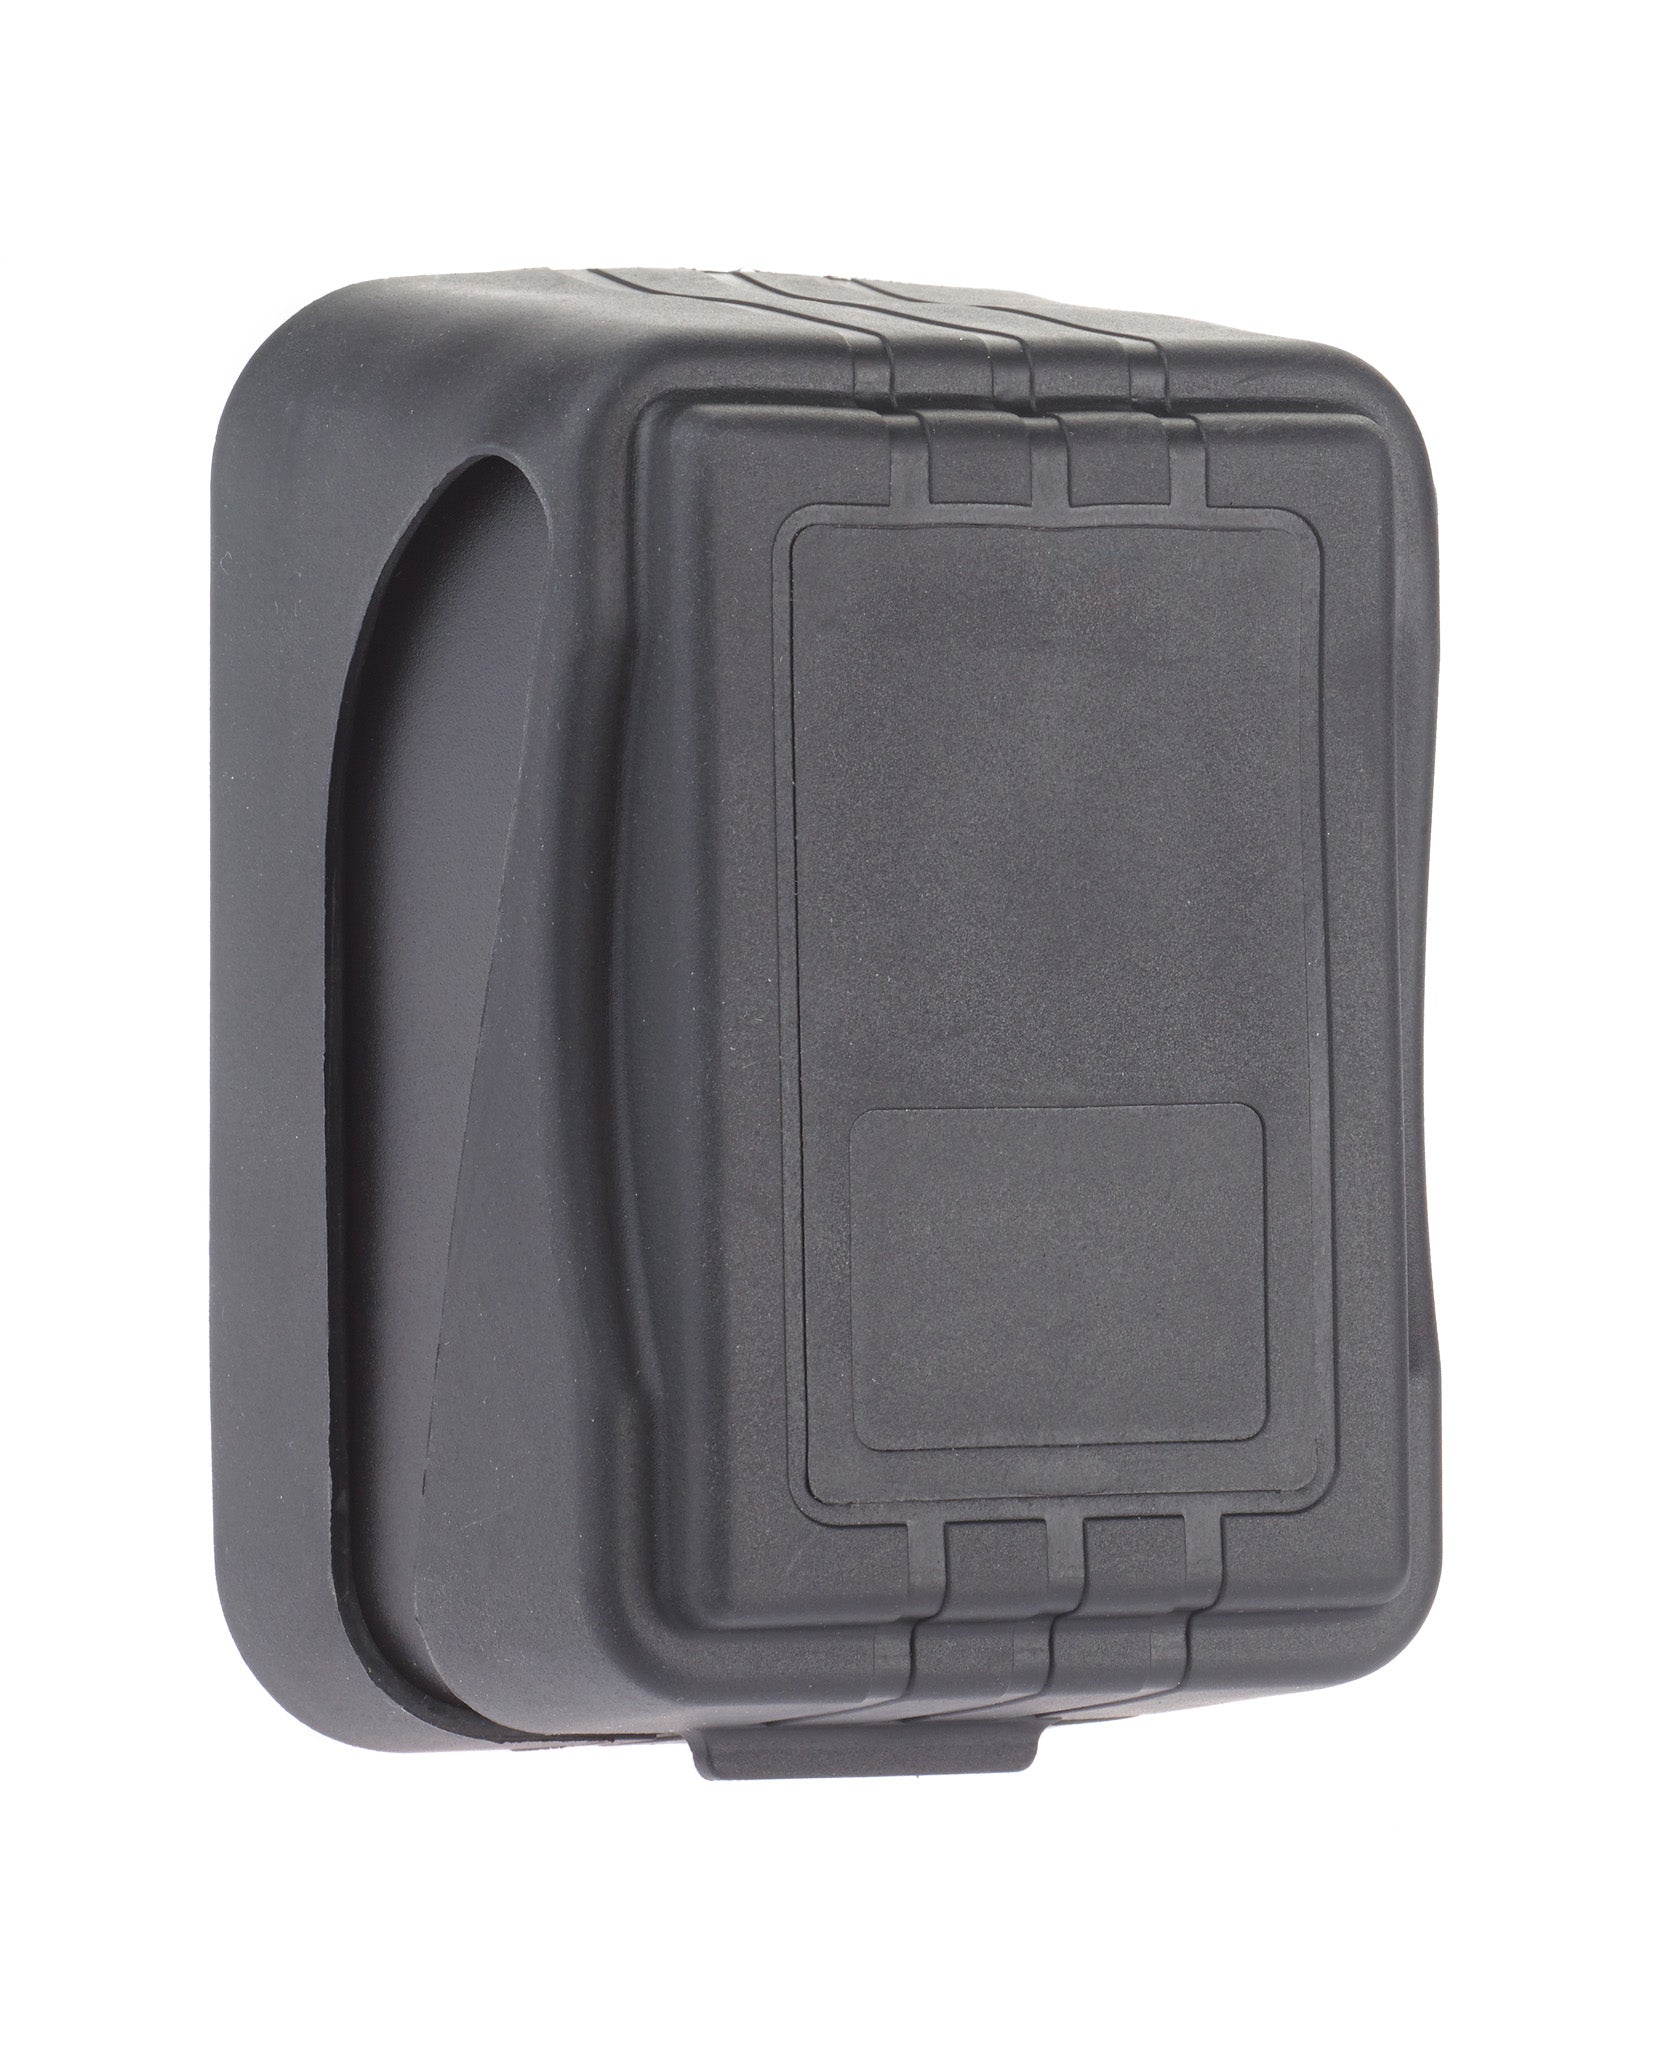 Black plastic weather cover for Supra S7 big box key safe from The Key Safe Company